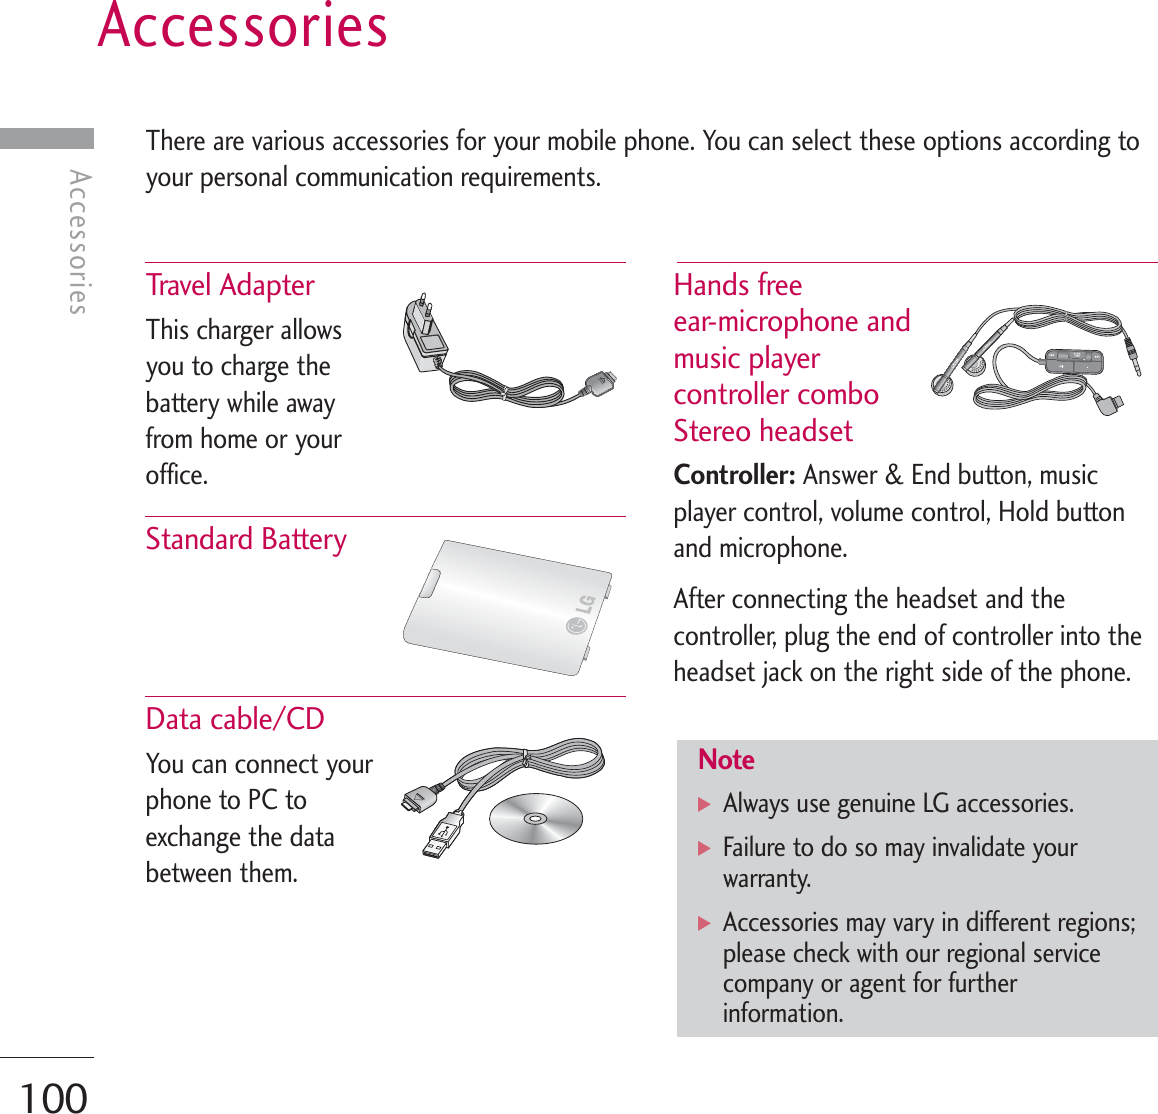 Accessories100AccessoriesThere are various accessories for your mobile phone. You can select these options according toyour personal communication requirements.Travel  A d a pte r  This charger allowsyou to charge thebattery while awayfrom home or youroffice.Standard Battery Data cable/CD You can connect yourphone to PC toexchange the databetween them. Hands free ear-microphone andmusic playercontroller comboStereo headsetController: Answer &amp; End button, musicplayer control, volume control, Hold buttonand microphone.After connecting the headset and thecontroller, plug the end of controller into theheadset jack on the right side of the phone.Note] Always use genuine LG accessories.] Failure to do so may invalidate yourwarranty.] Accessories may vary in different regions;please check with our regional servicecompany or agent for furtherinformation.